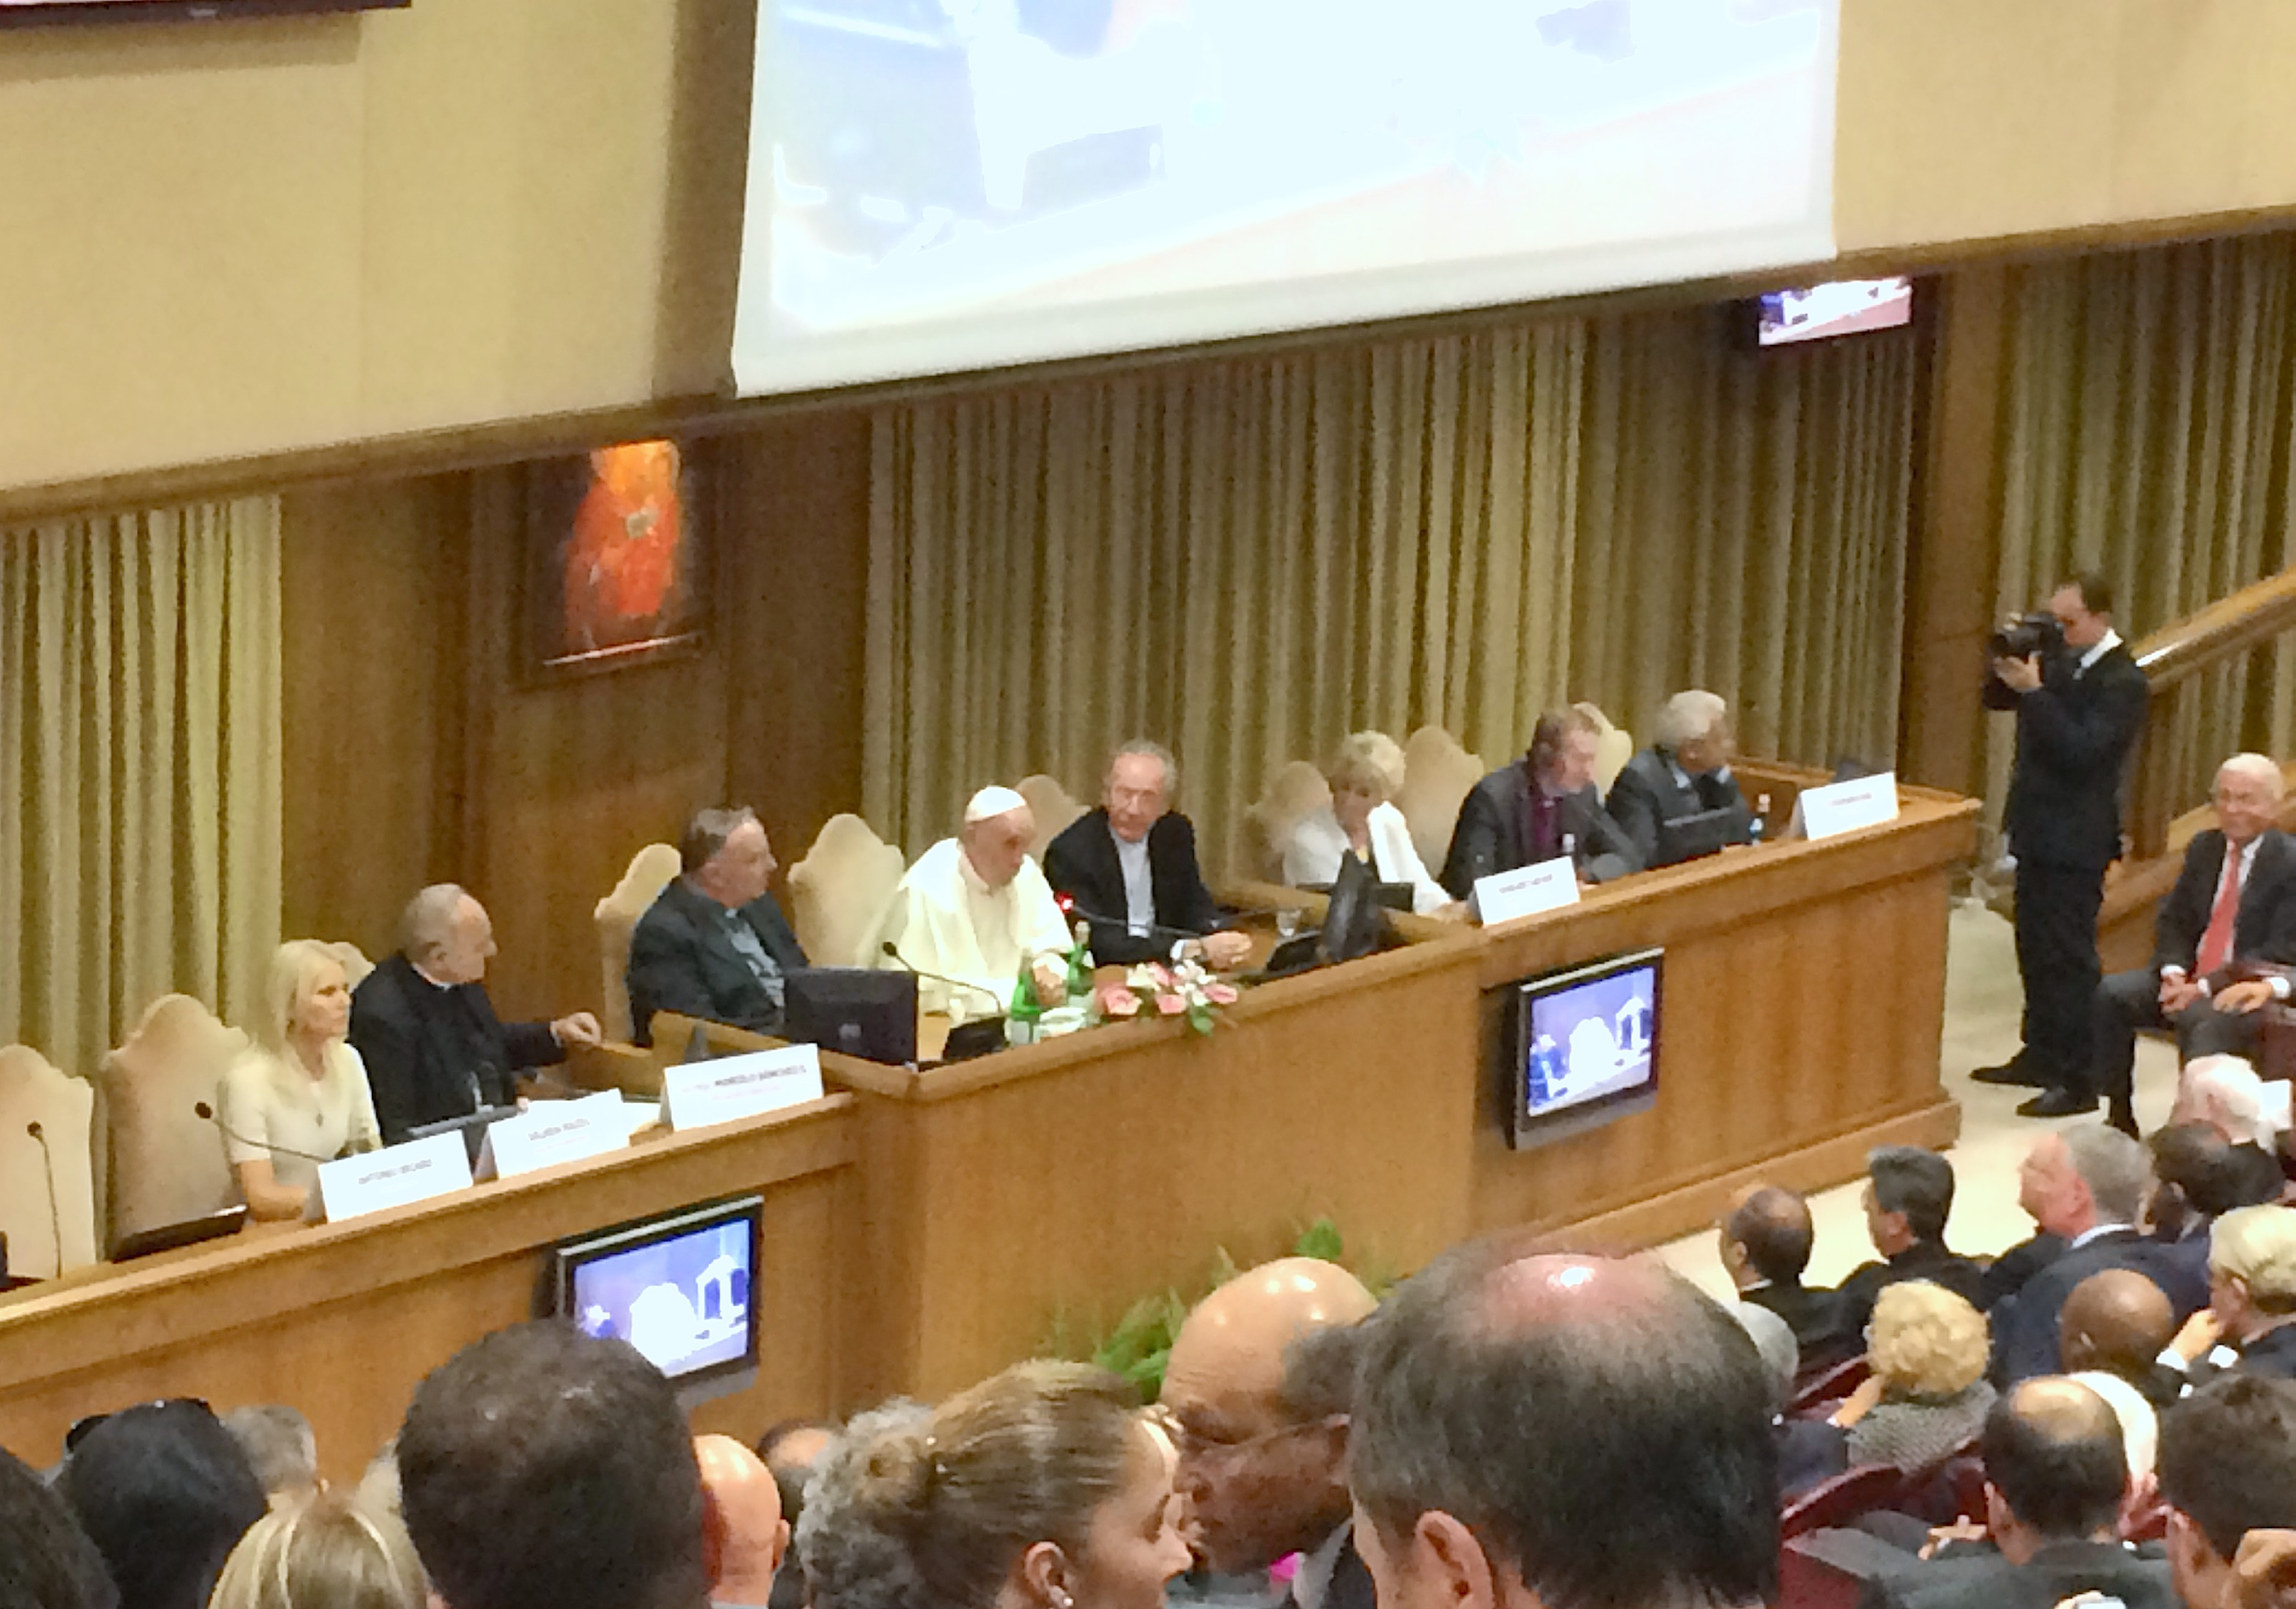 Summit of the mayors of the world in the Vatican